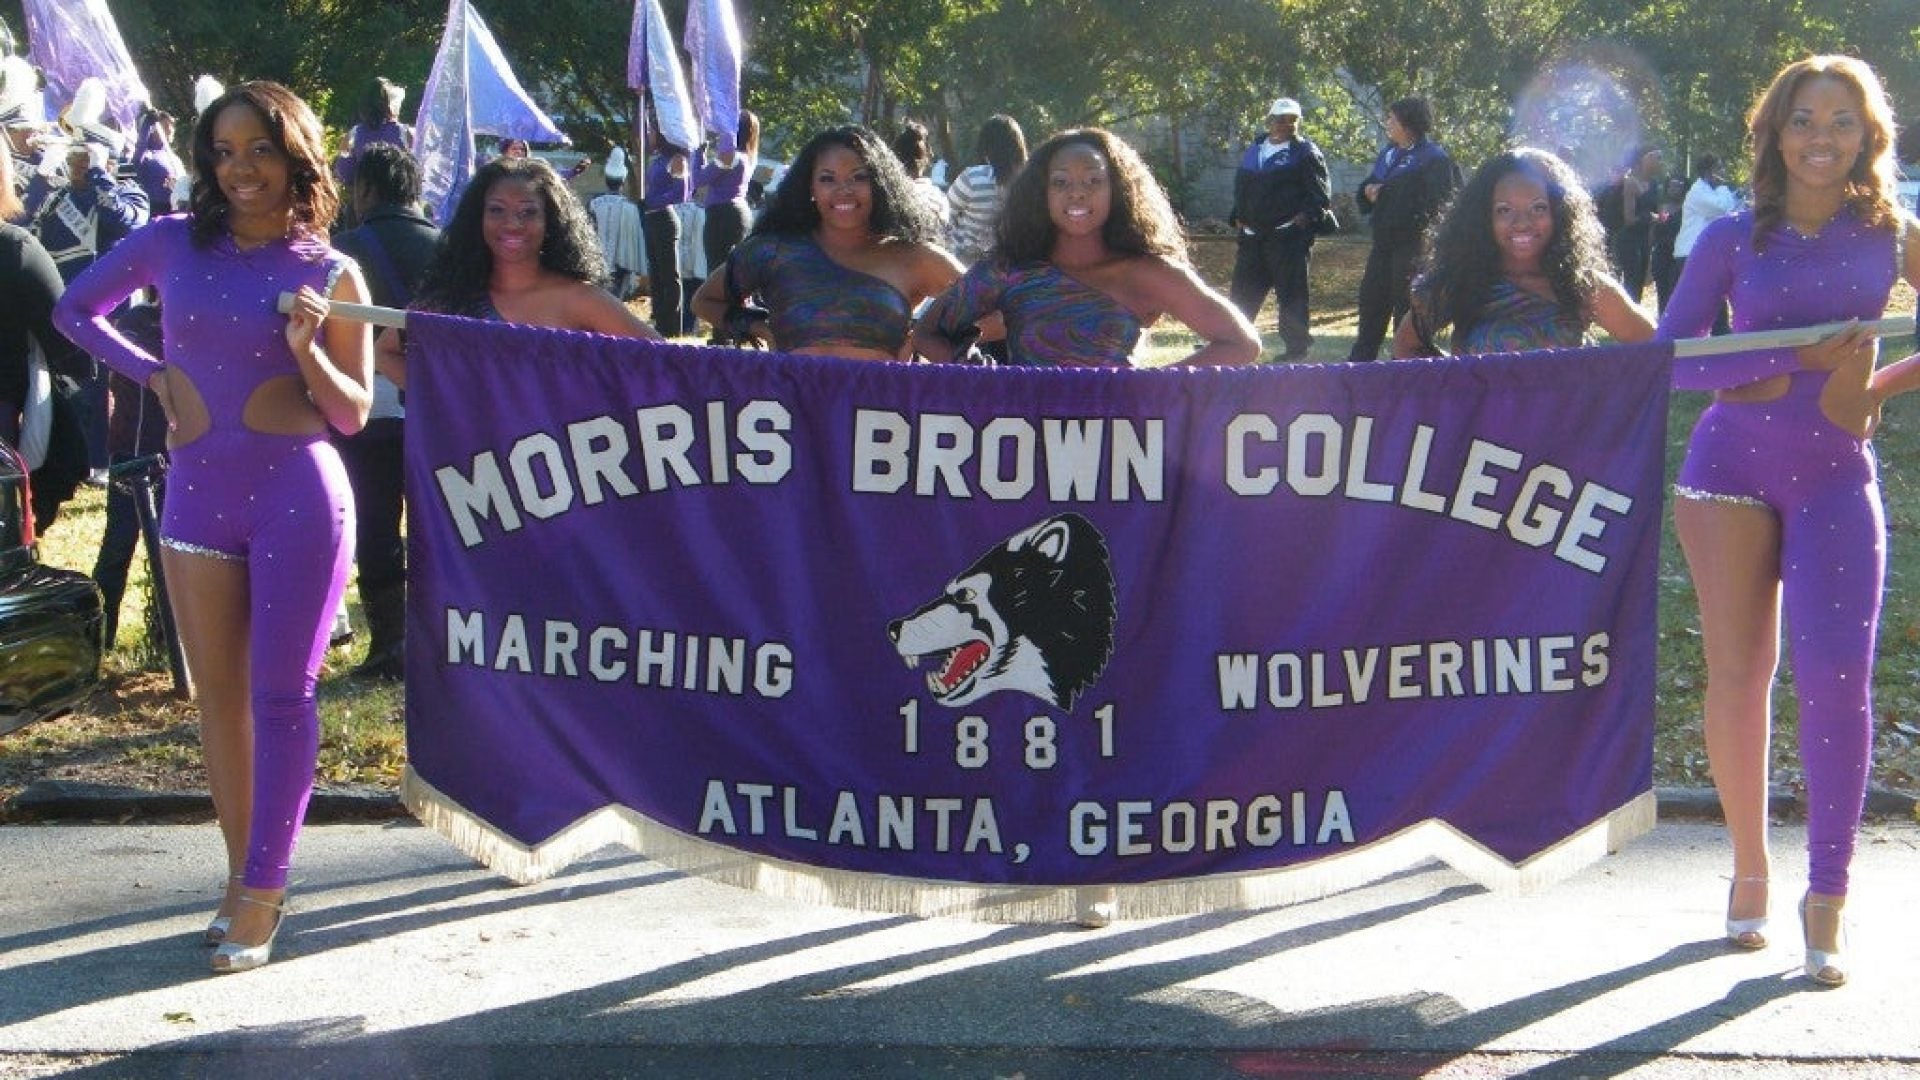 Morris Brown College One Step Closer To Regaining Accreditation After Nearly 20 Years!